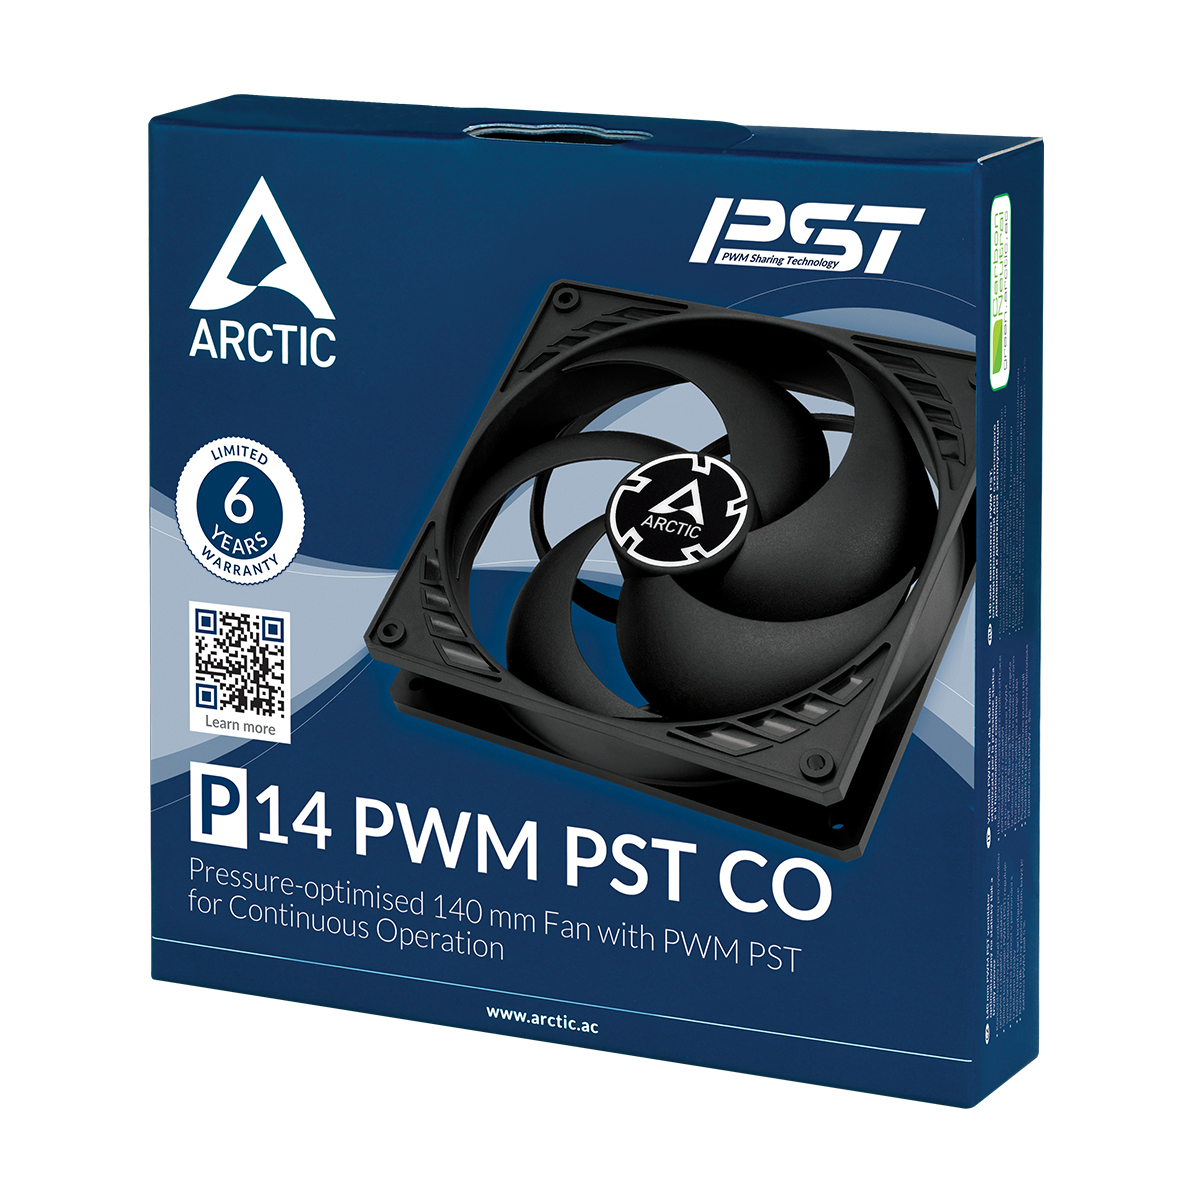 P14 PWM PST CO | Pressure-optimised 140 mm PWM PST Fan for